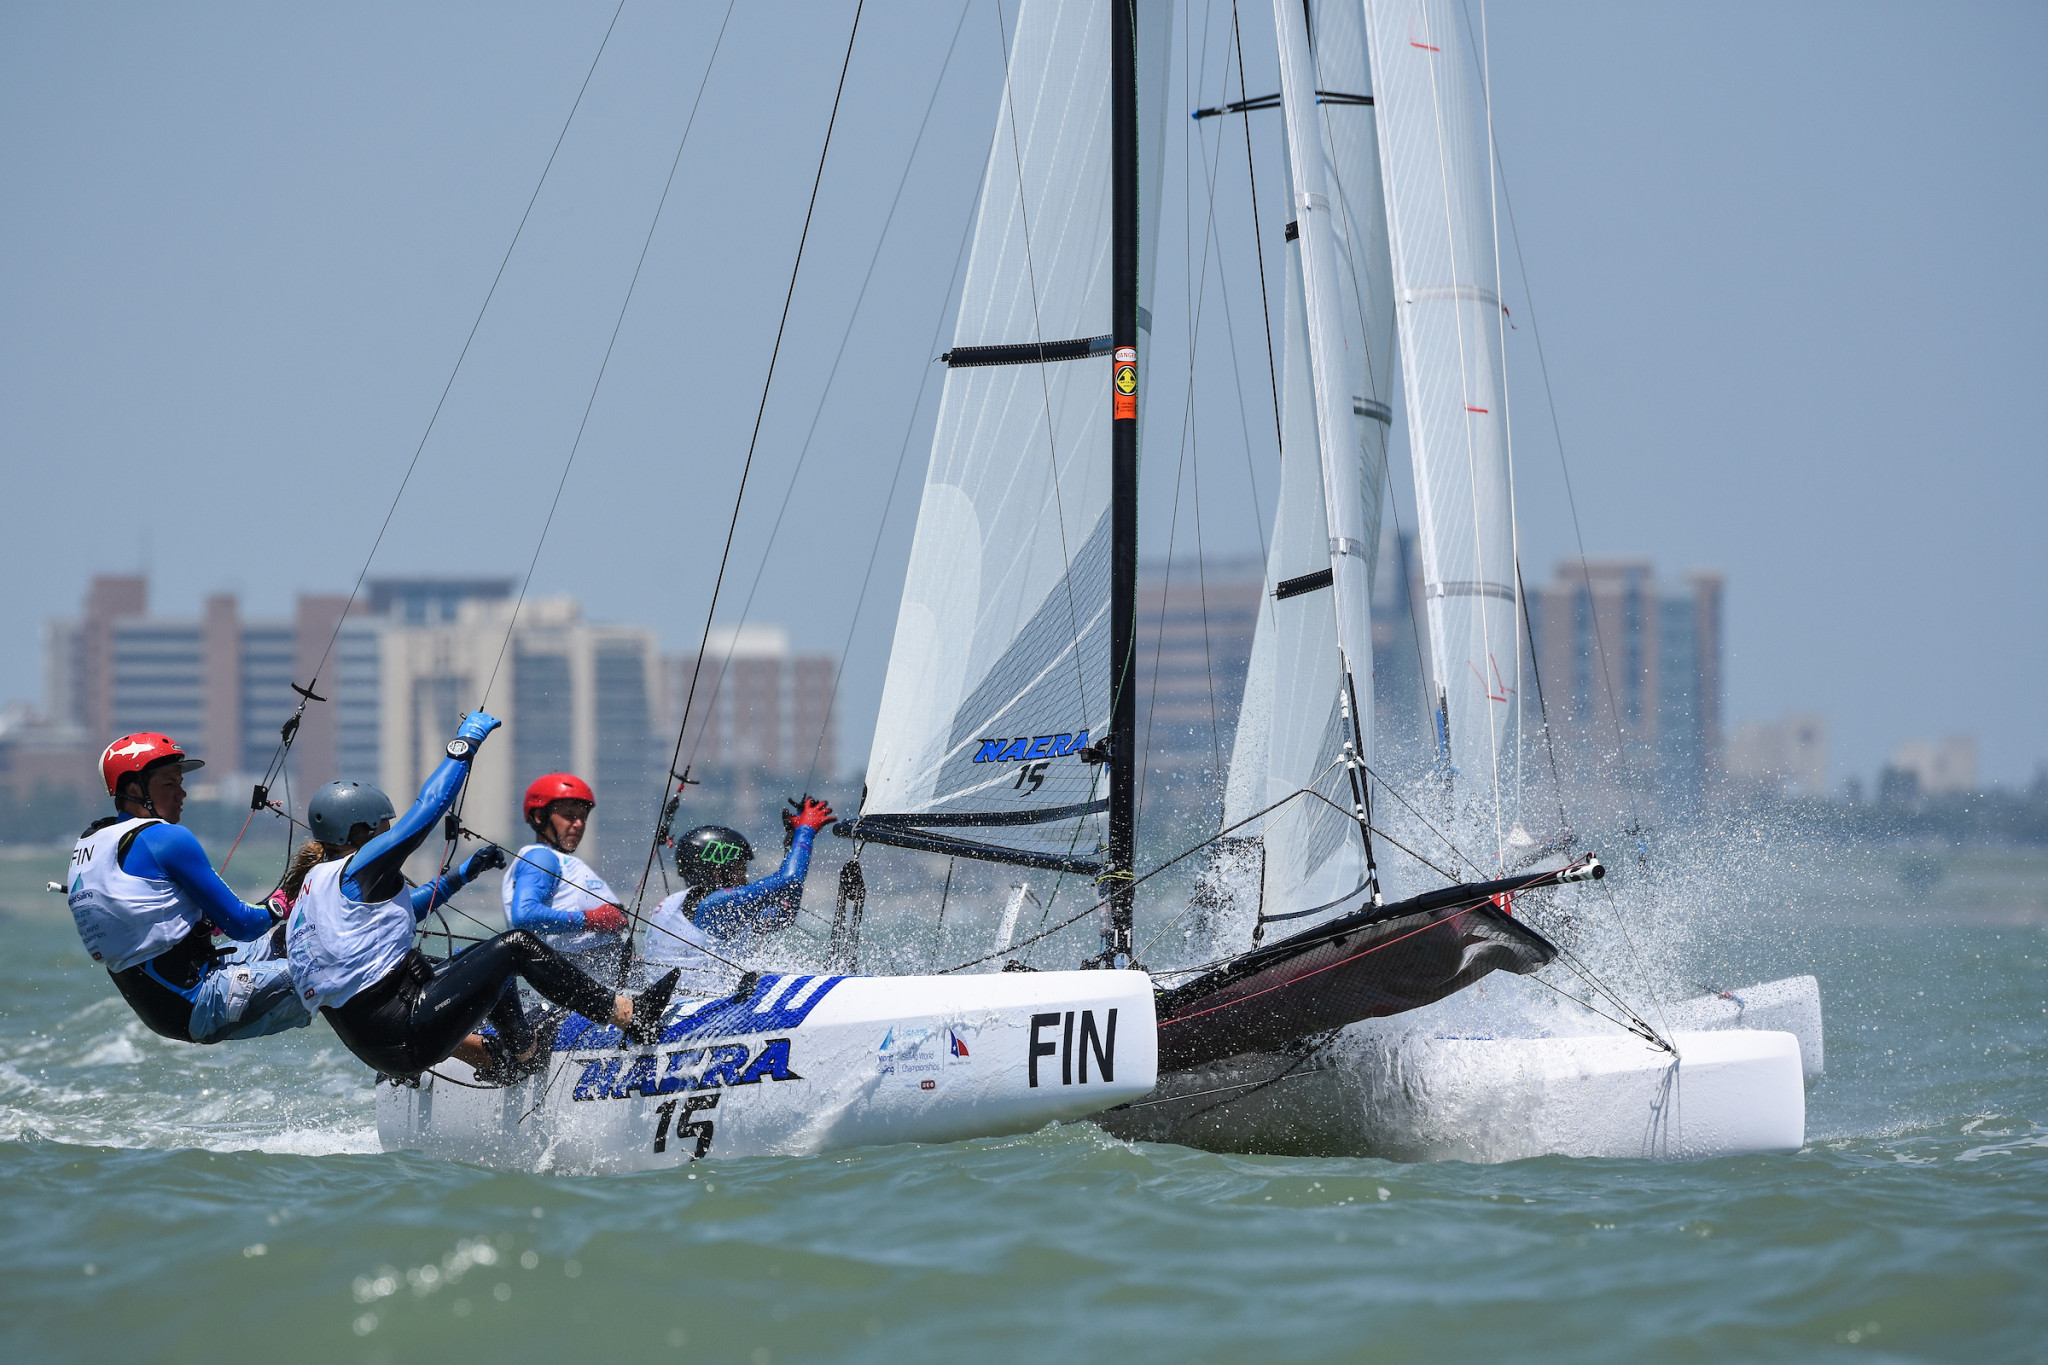 The Hague in the Netherlands is set to host the 2021 Youth Sailing World Championships ©World Sailing